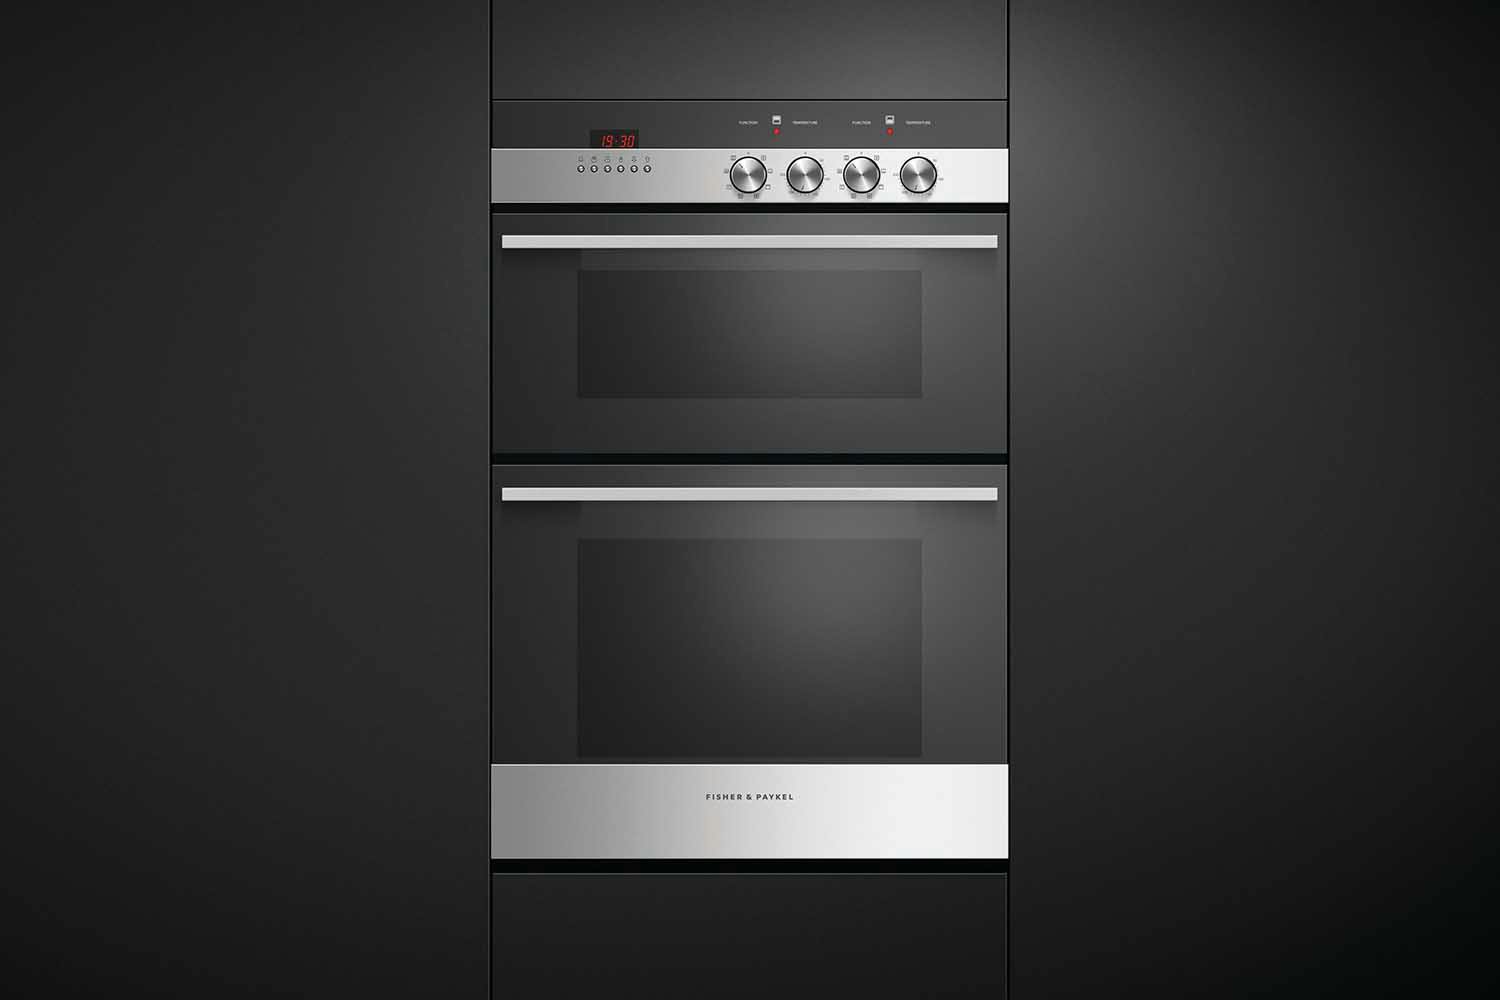 Fisher & Paykel 60cm 7 Function Double Oven - Stainless Steel